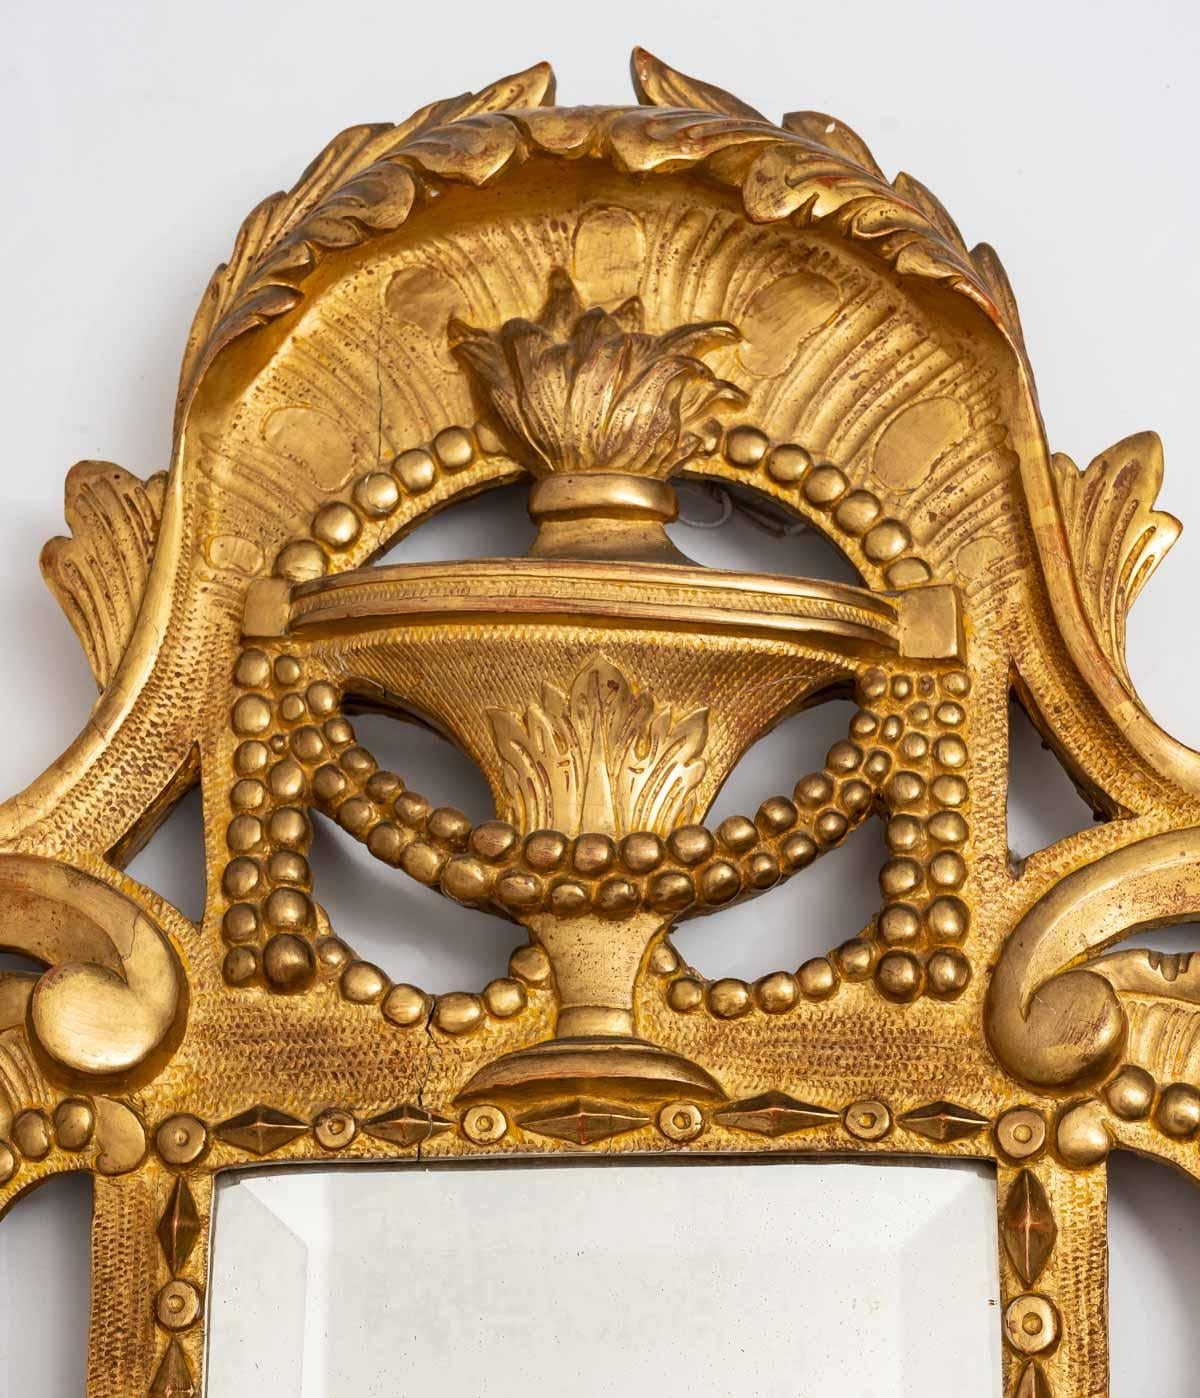 Rare giltwood bedroom mirror (sometimes called a 